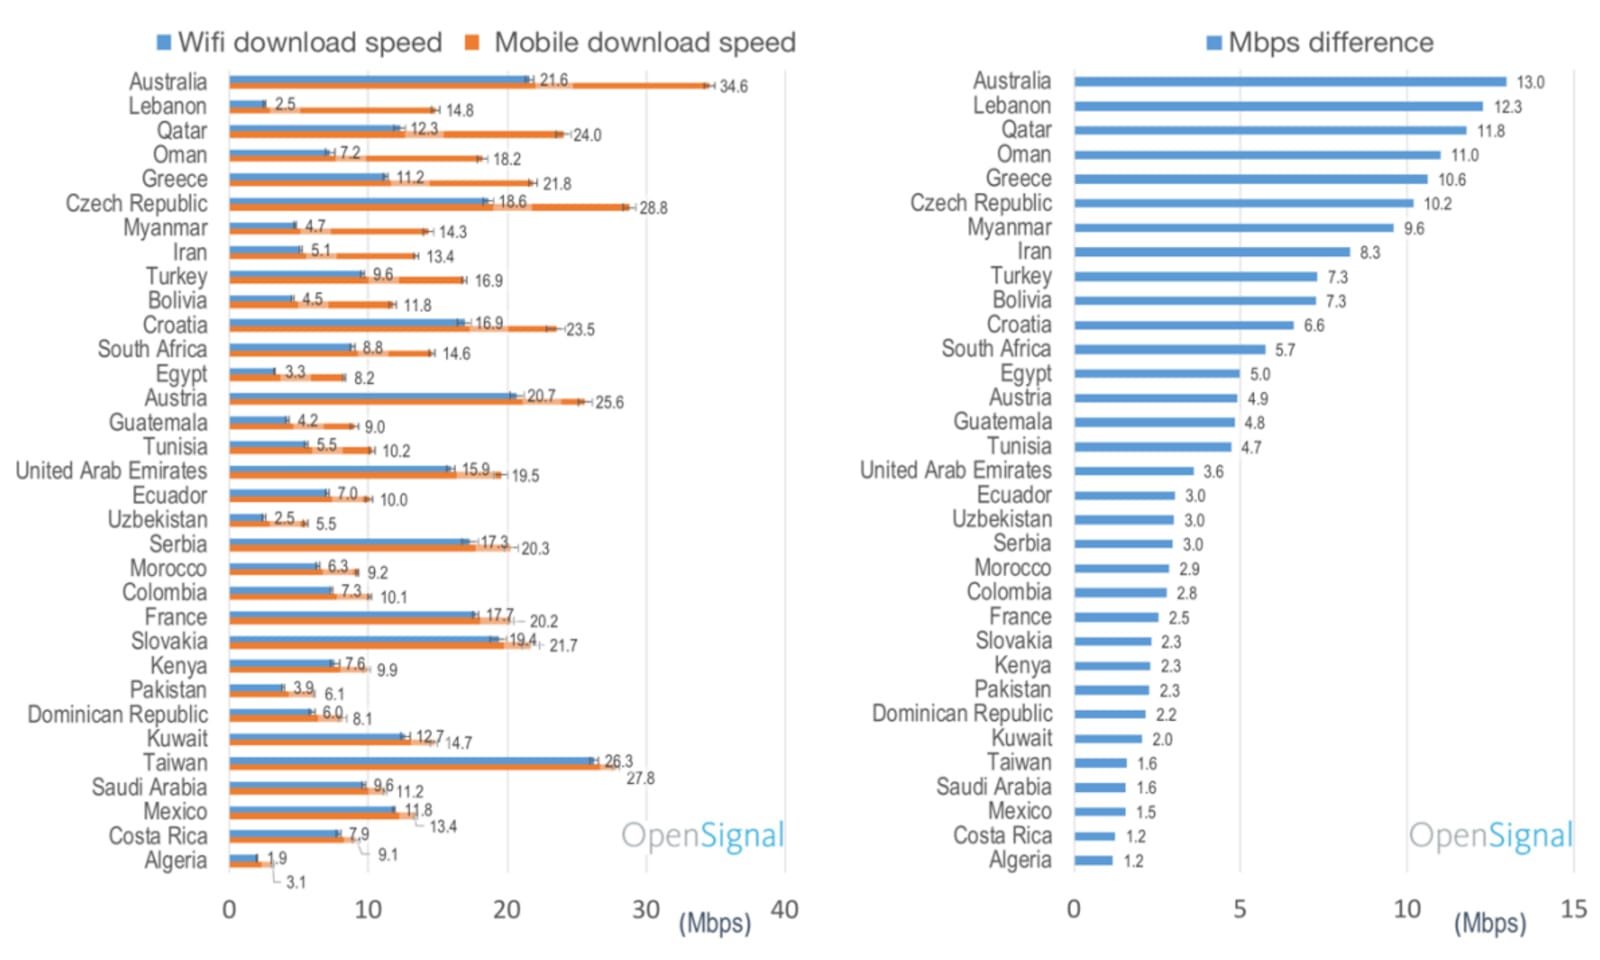 Countries where mobile data is typically faster than WiFi